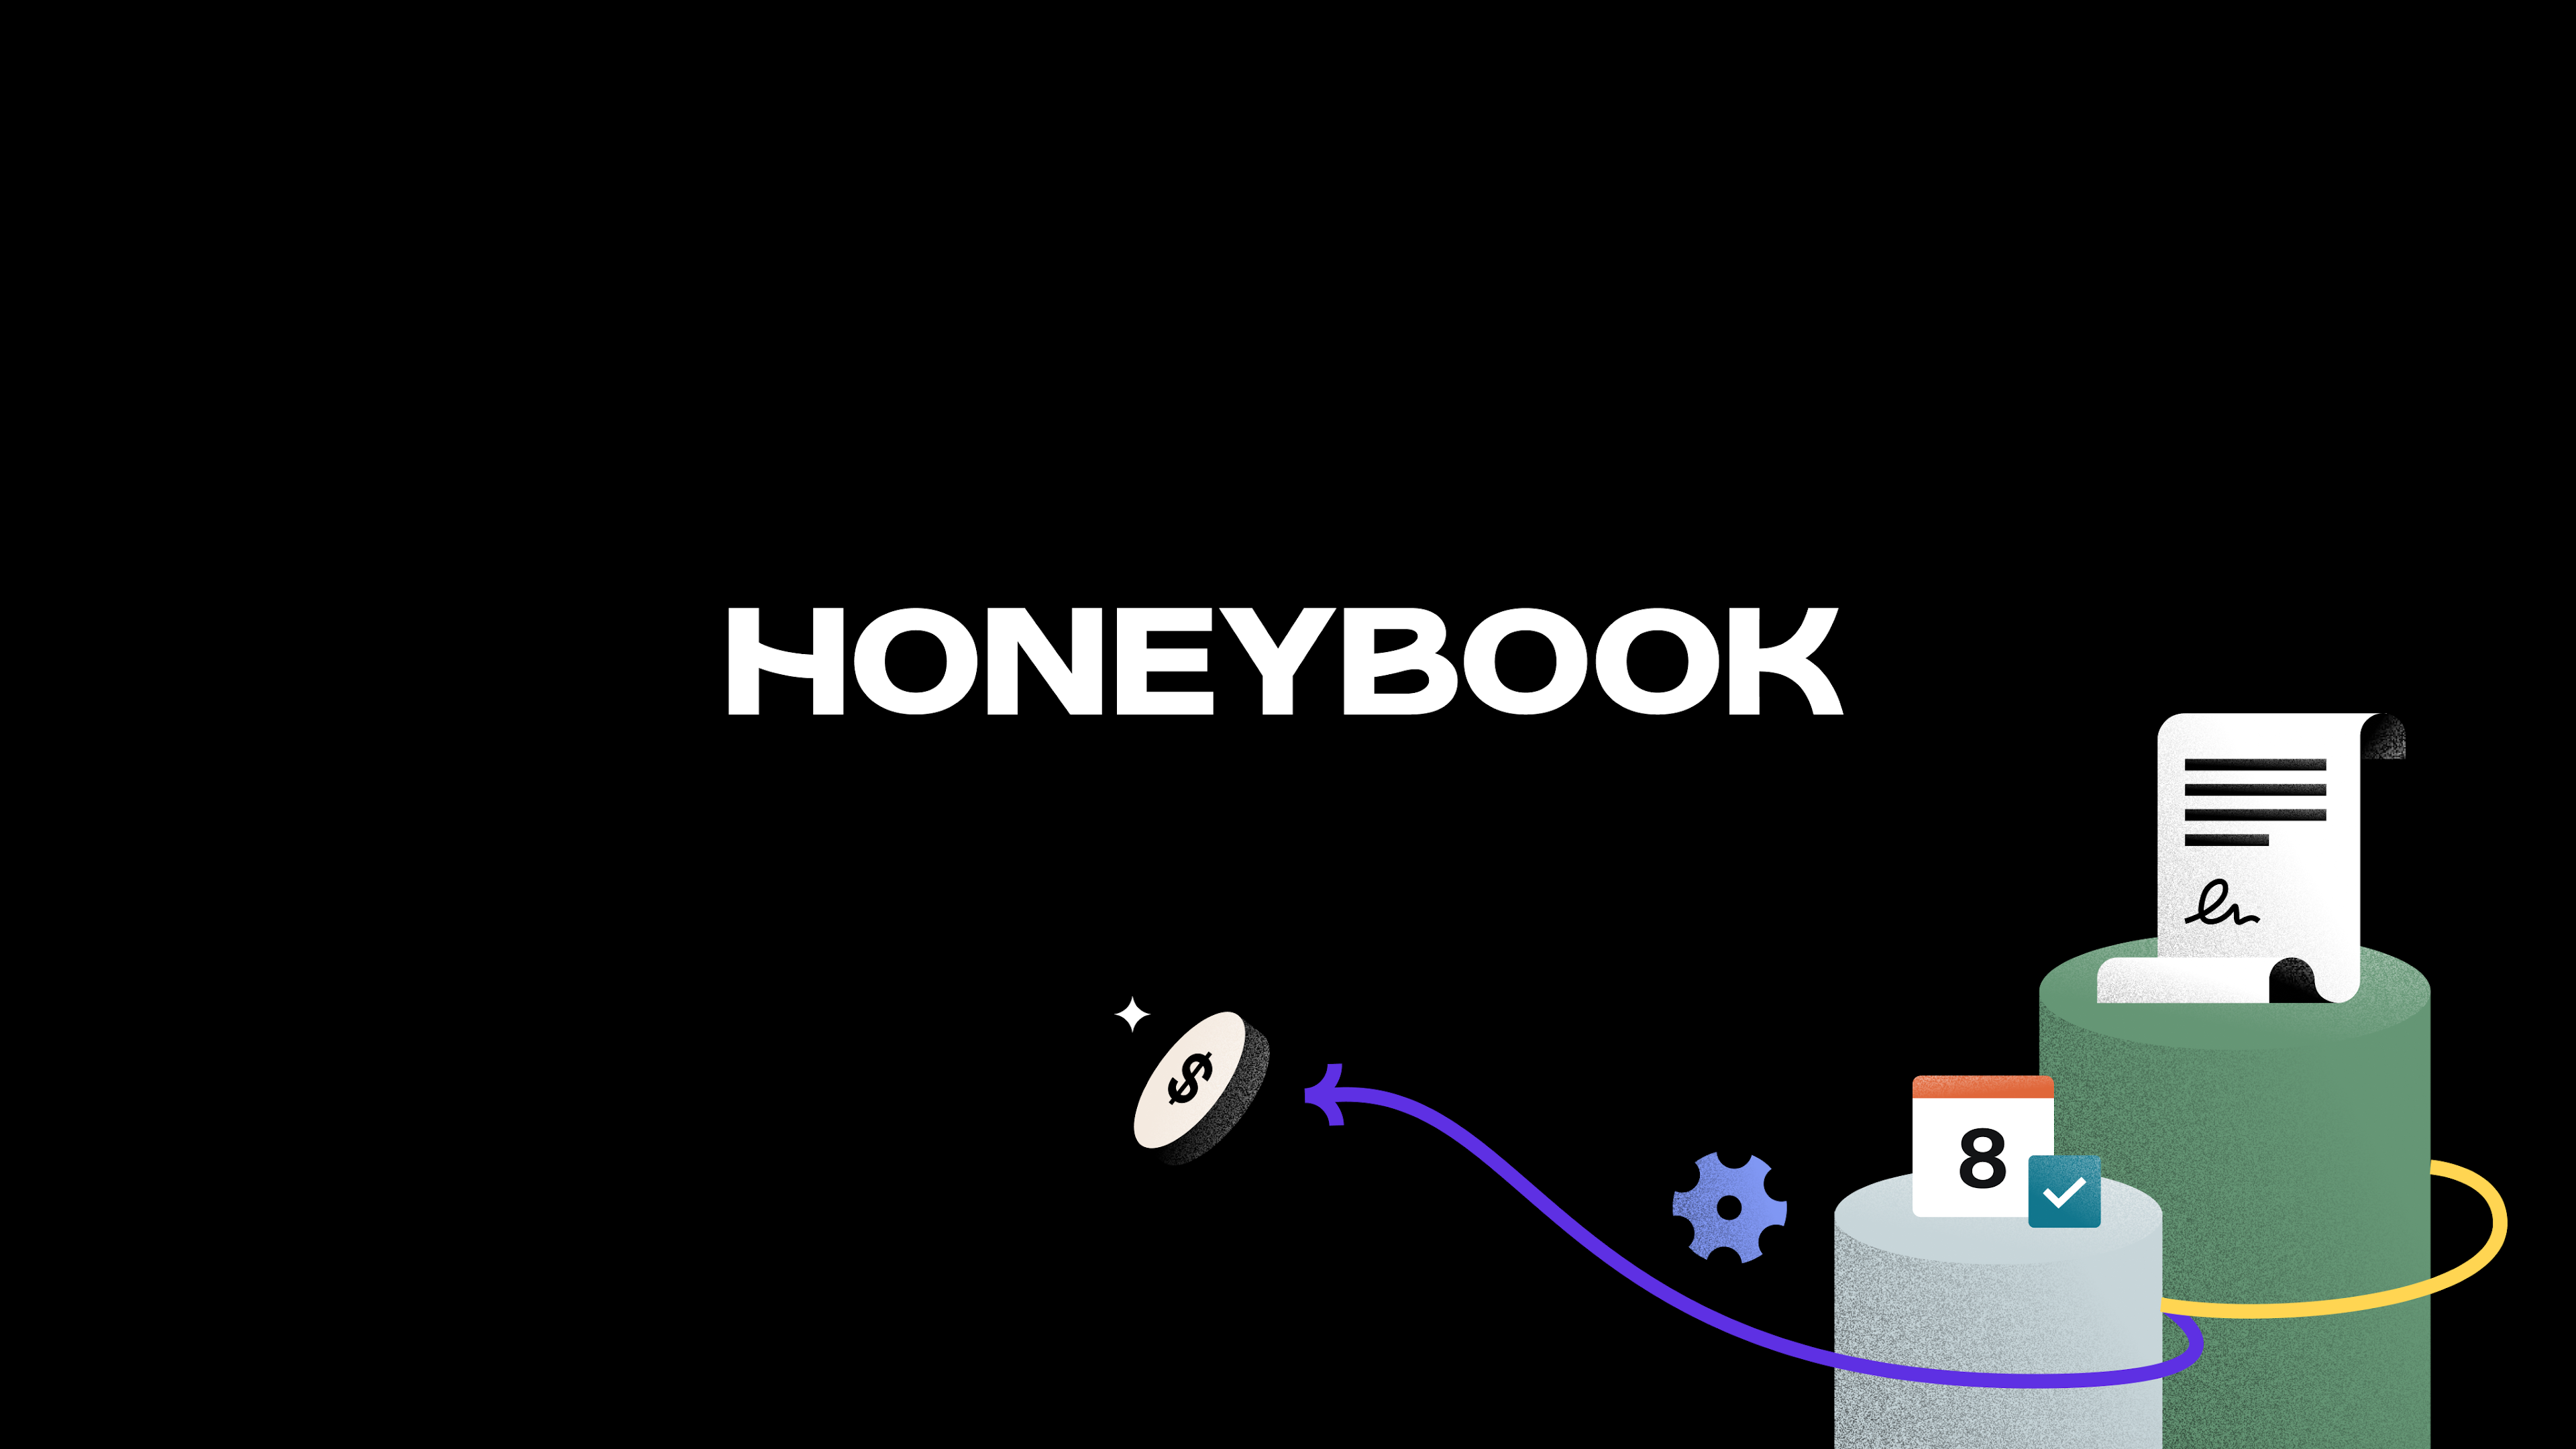 Android Apps by HoneyBook Inc on Google Play